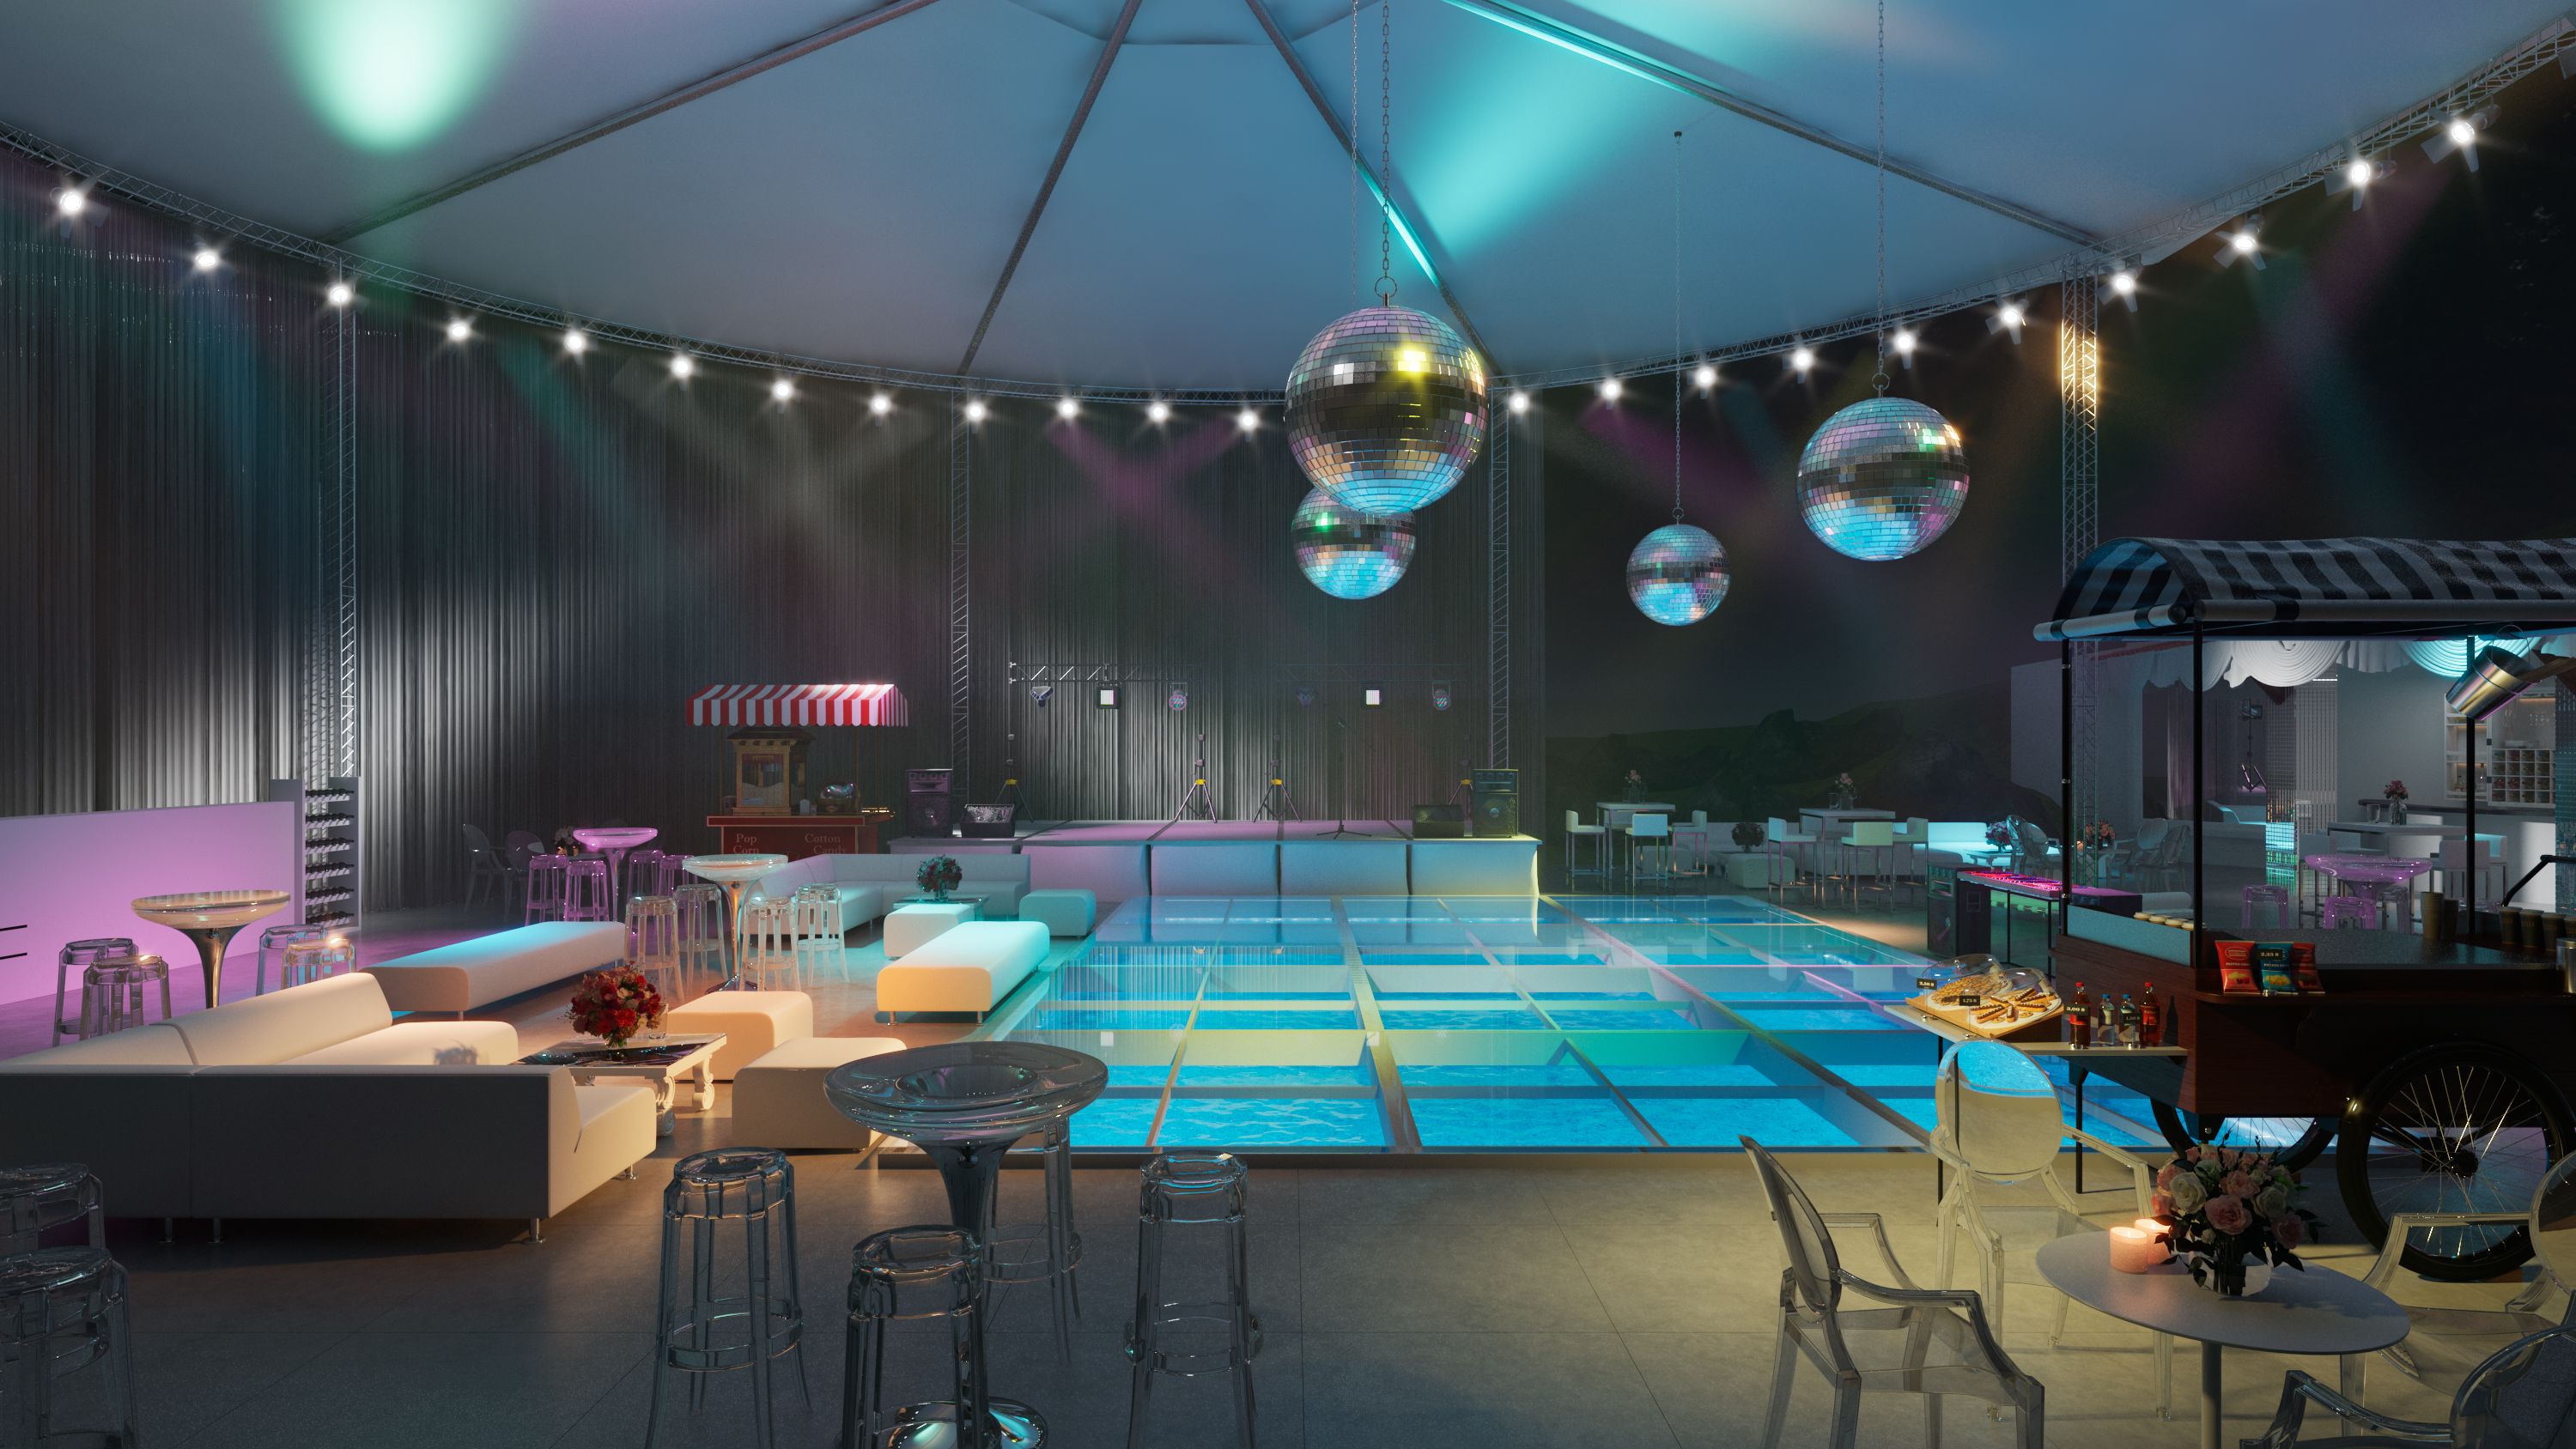 Super realistic rendering of pool covered dance floor for spanish wedding planner Tony Segui with high stools, pool cover, round circus tent and outdoor furniture